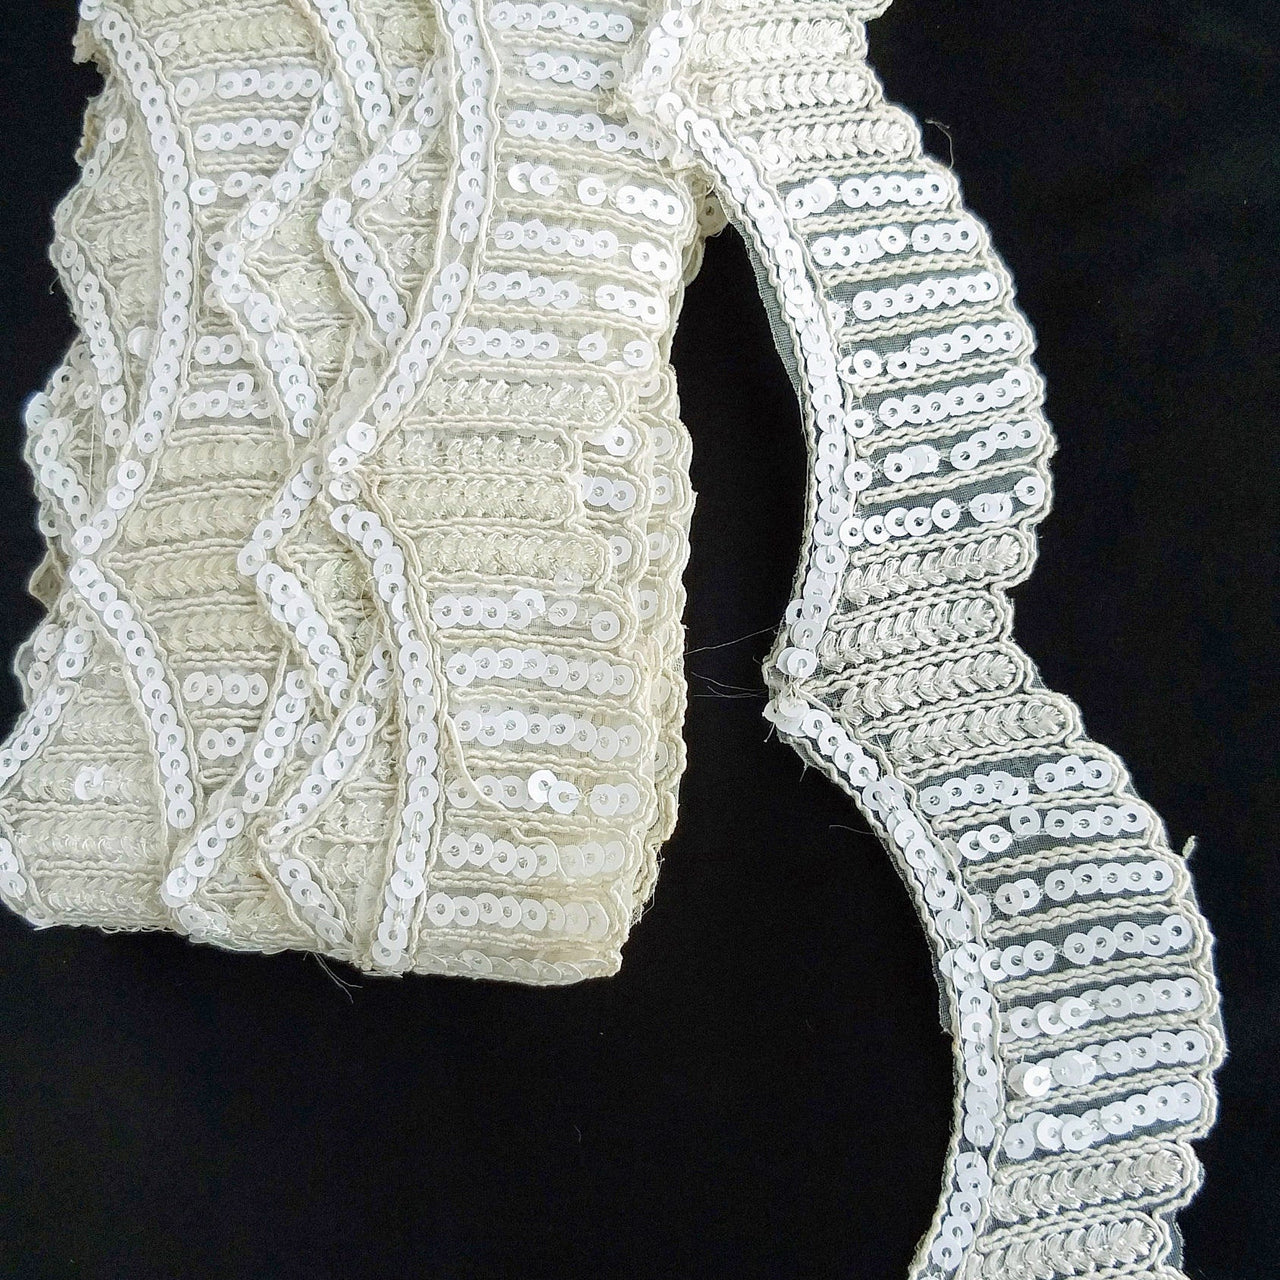 Black / White Embroidery Cut Work With Sequins Lace Trim Approx. 60mm Wide - 210119L498 / 99